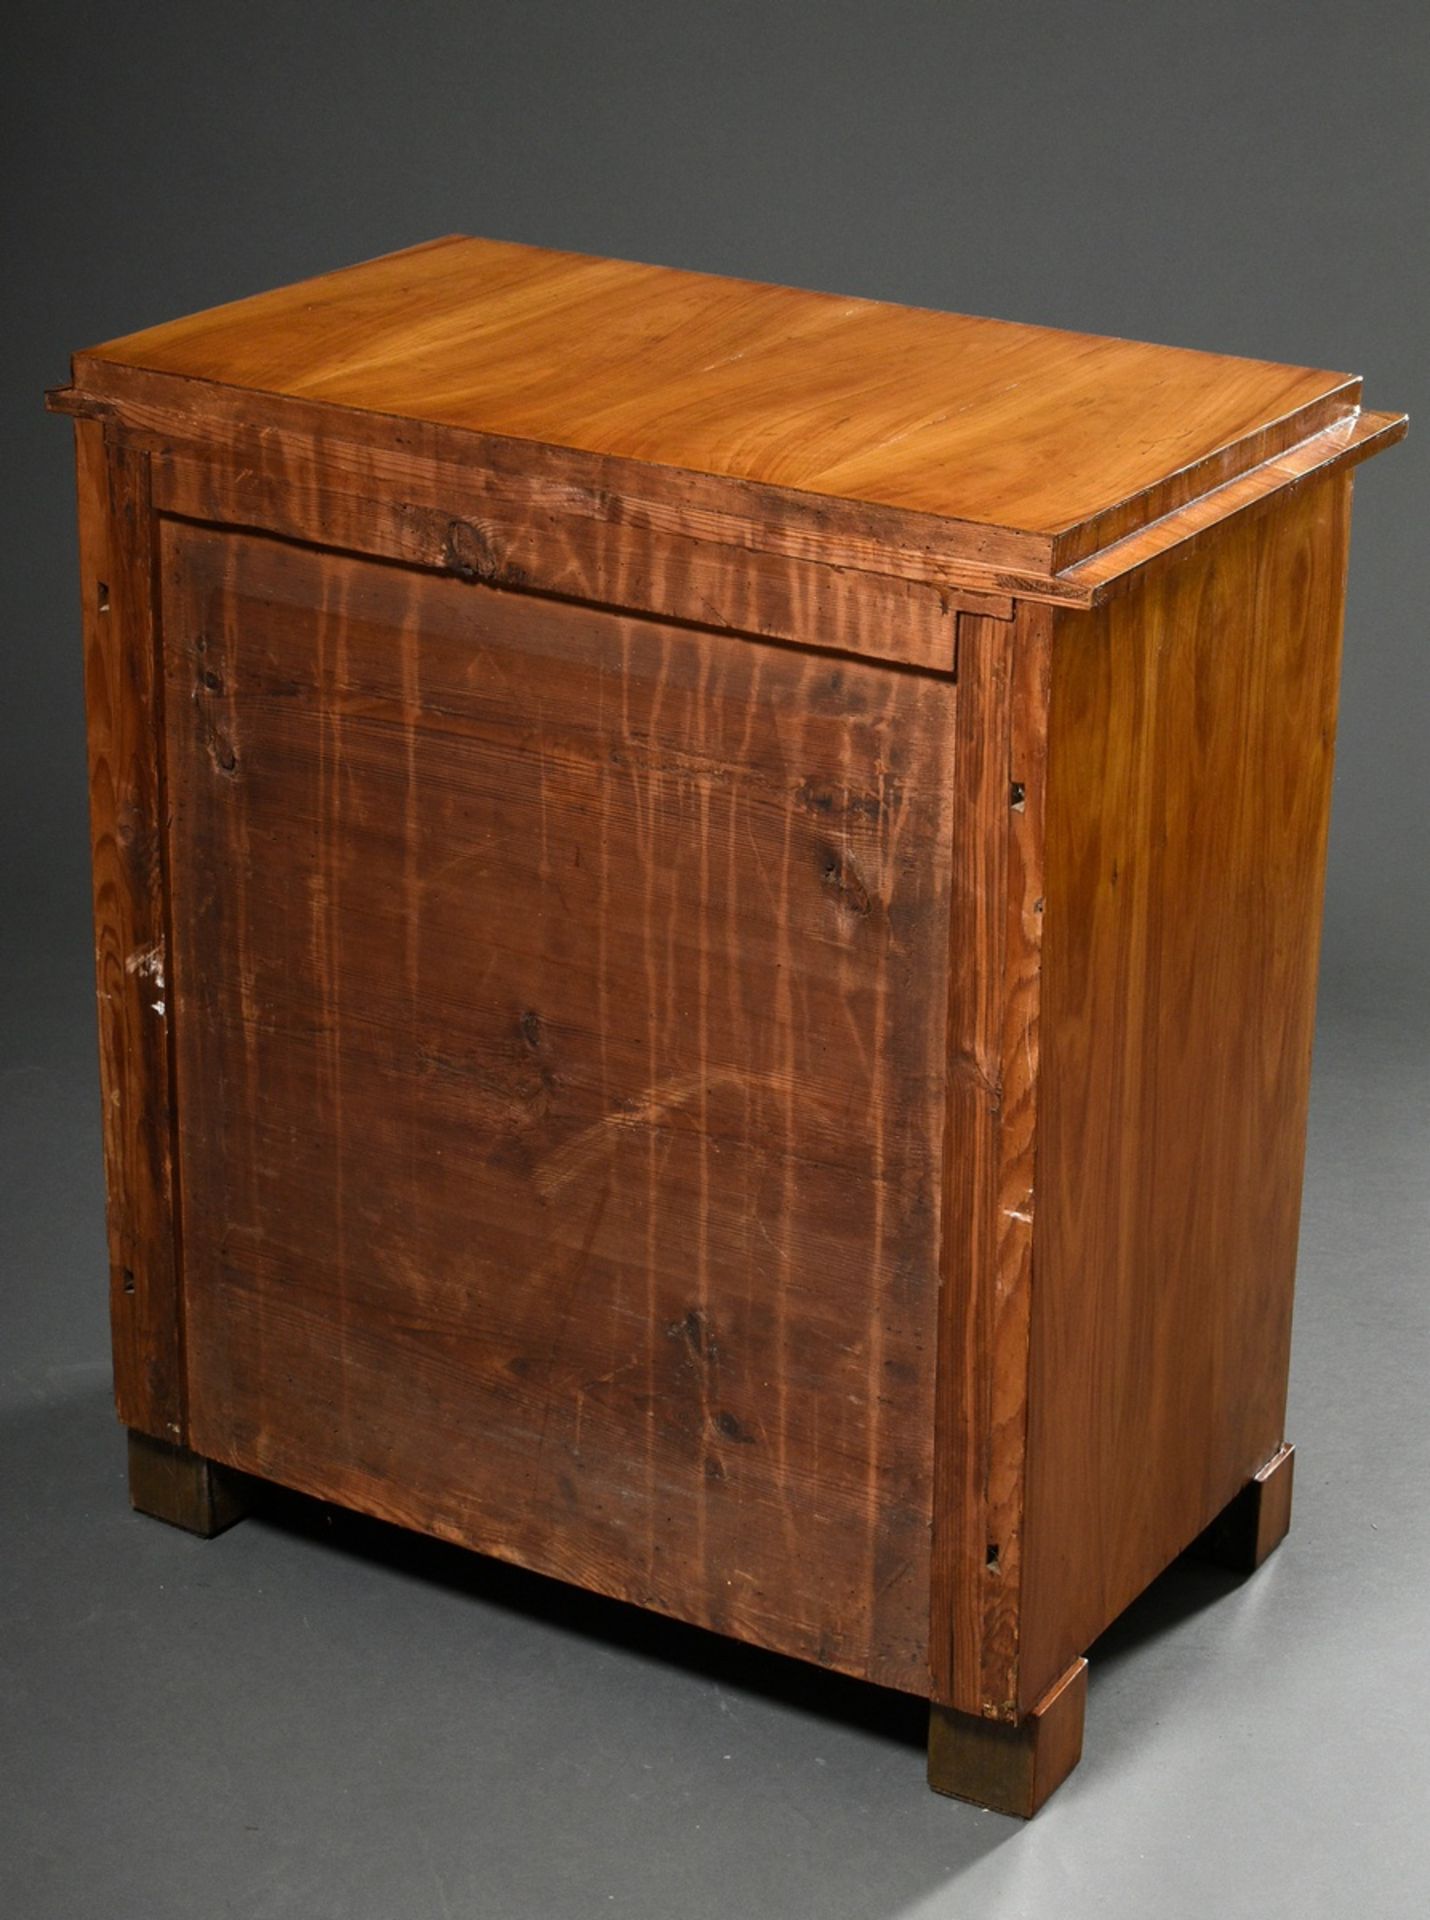 Small console dresser with segmental arch in the door, cherry/softwood veneer, 1st quarter 19th c., - Image 6 of 6